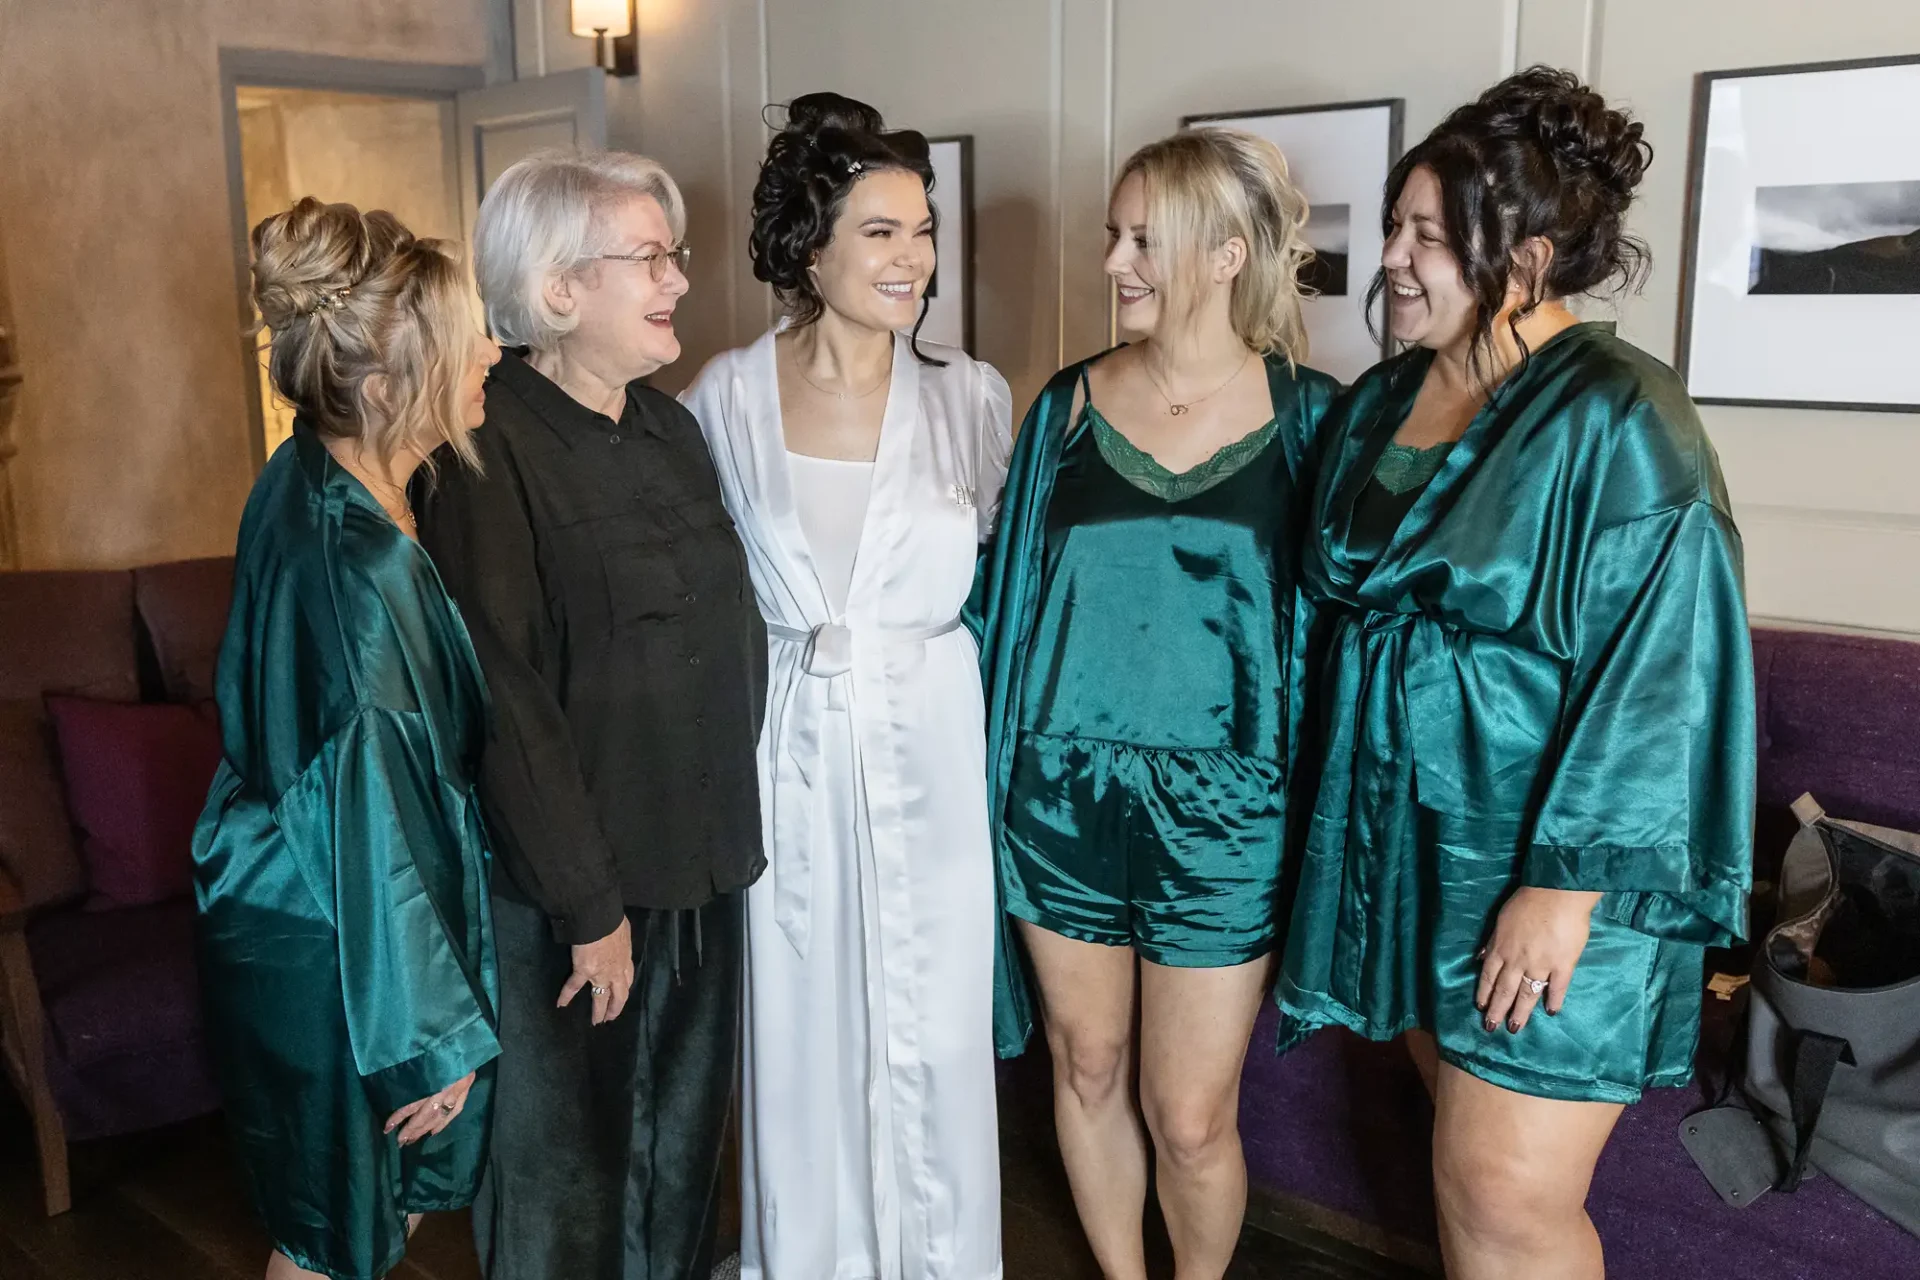 Five women in robes share a joyful moment; the central woman in a white robe, presumably a bride, surrounded by others in green robes, smiling and conversing in an indoor setting.